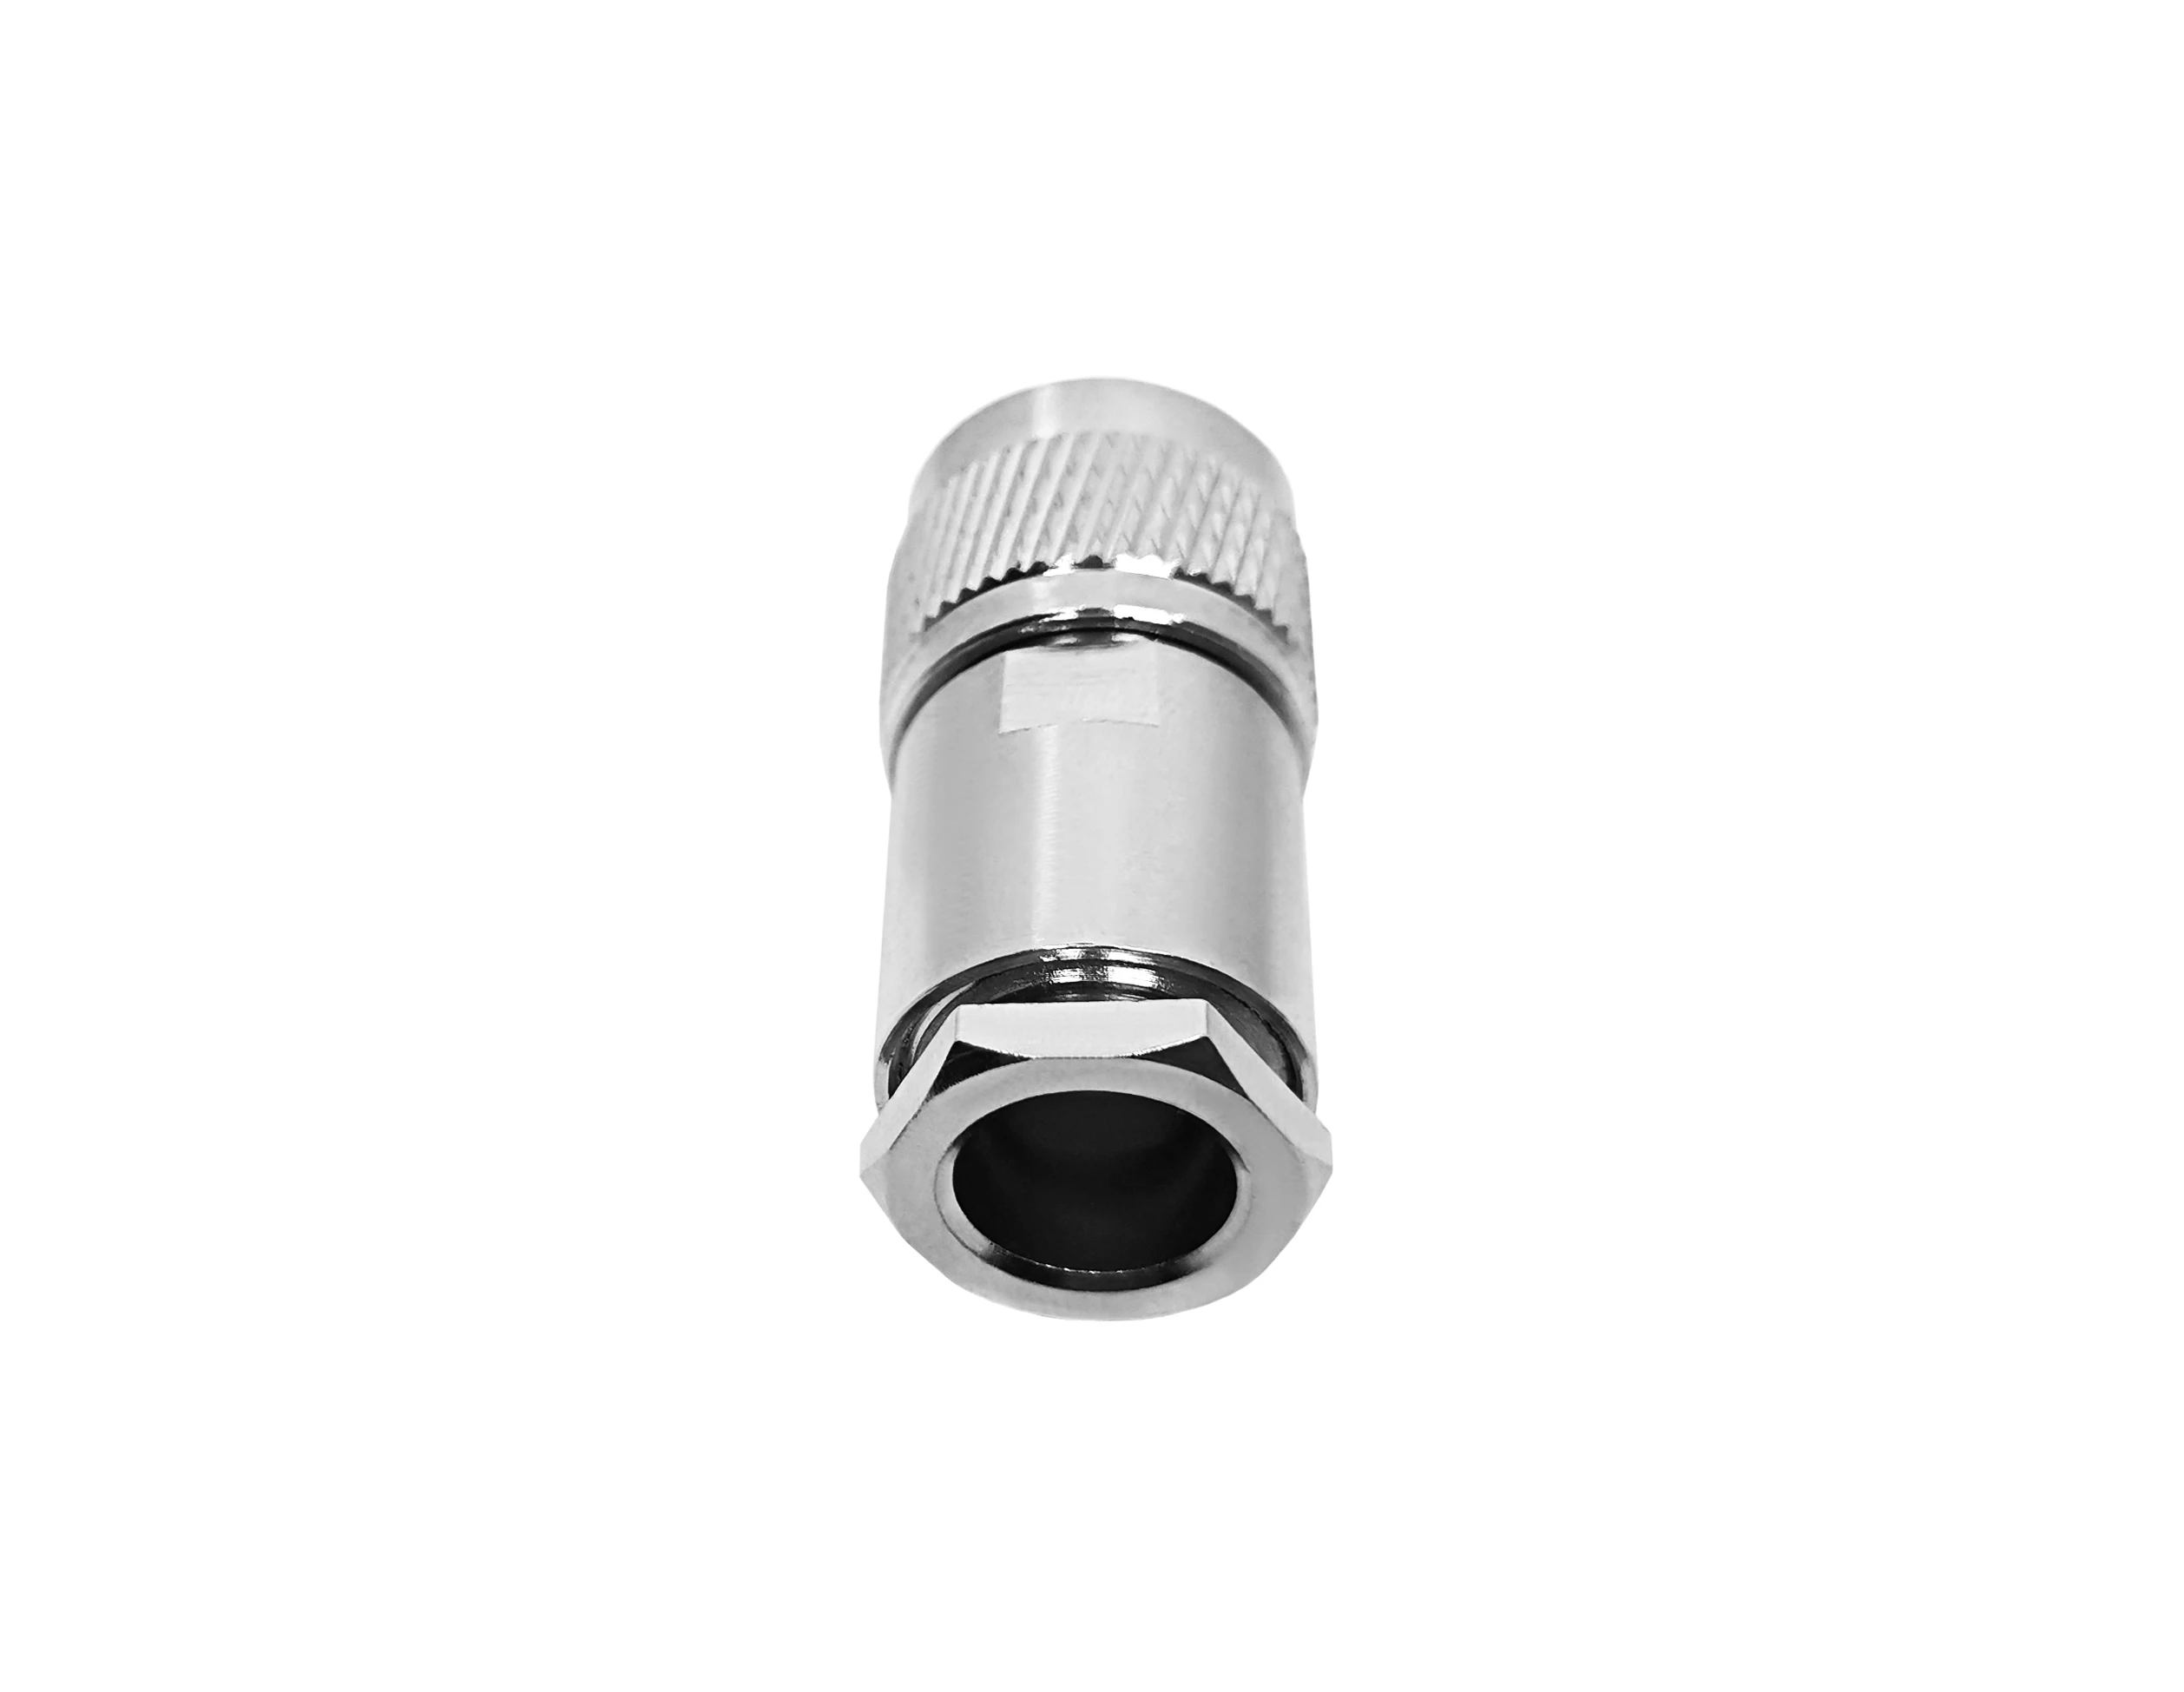 LMR400 RG213 RG214 RG8 Coaxial Cable Connectors N Type Male Plug Clamp Connector Solderless Type For LMR400 Cable factory